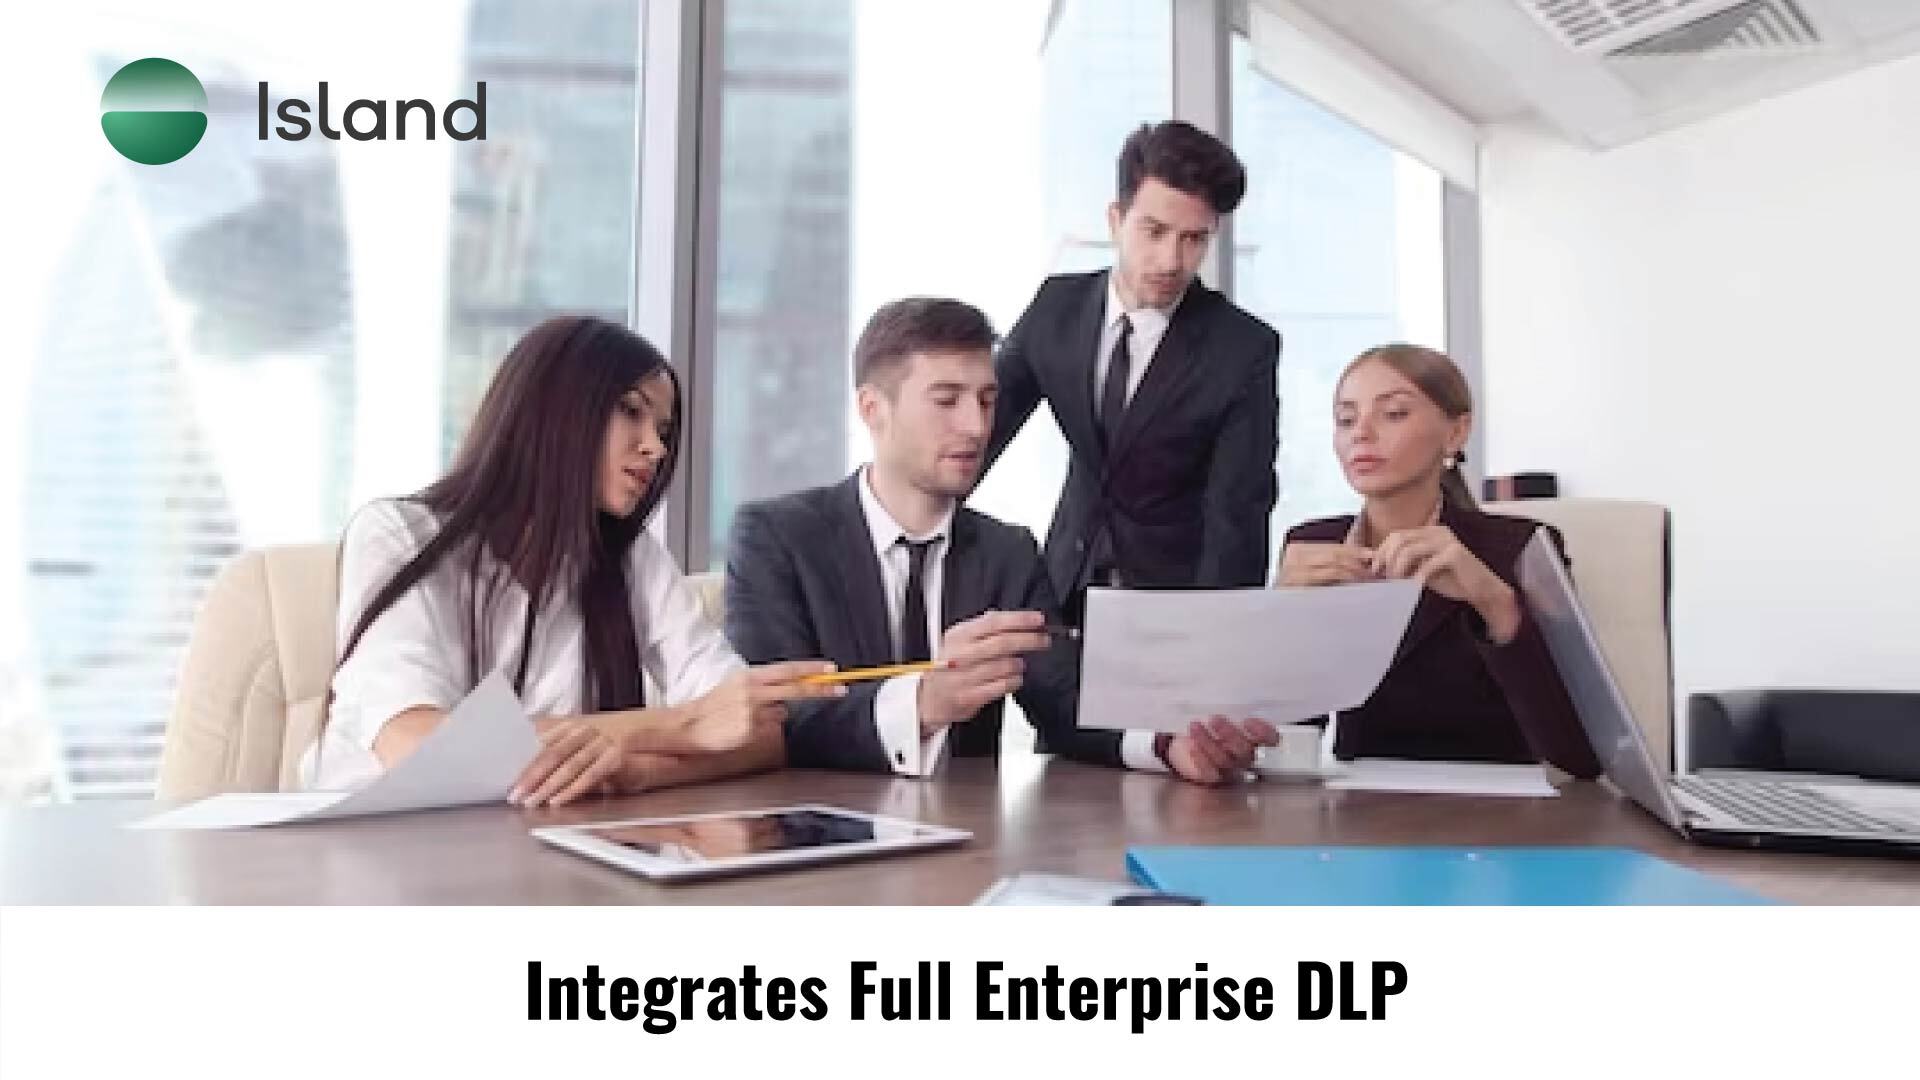 Island Integrates Full Enterprise DLP to Empower Organizations to Safely Realize the Value of Generative AI